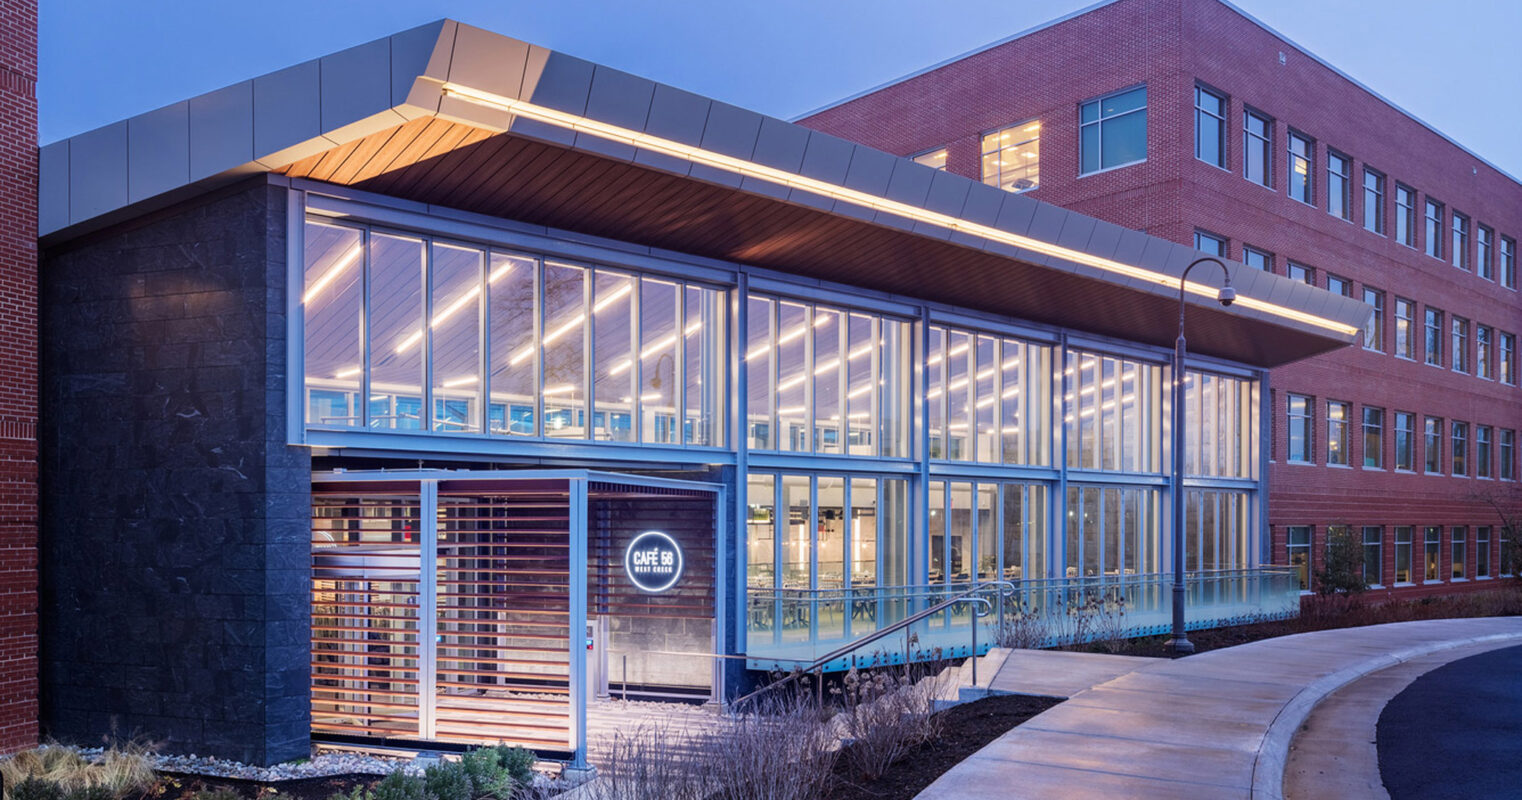 Modern educational building facade at twilight featuring a glass-walled walkway, illuminated interior spaces, sleek metal roof accents, and warm wooden cladding on a revolving entrance door area. The design integrates clear and opaque materials harmoniously, showcasing contemporary architectural style.